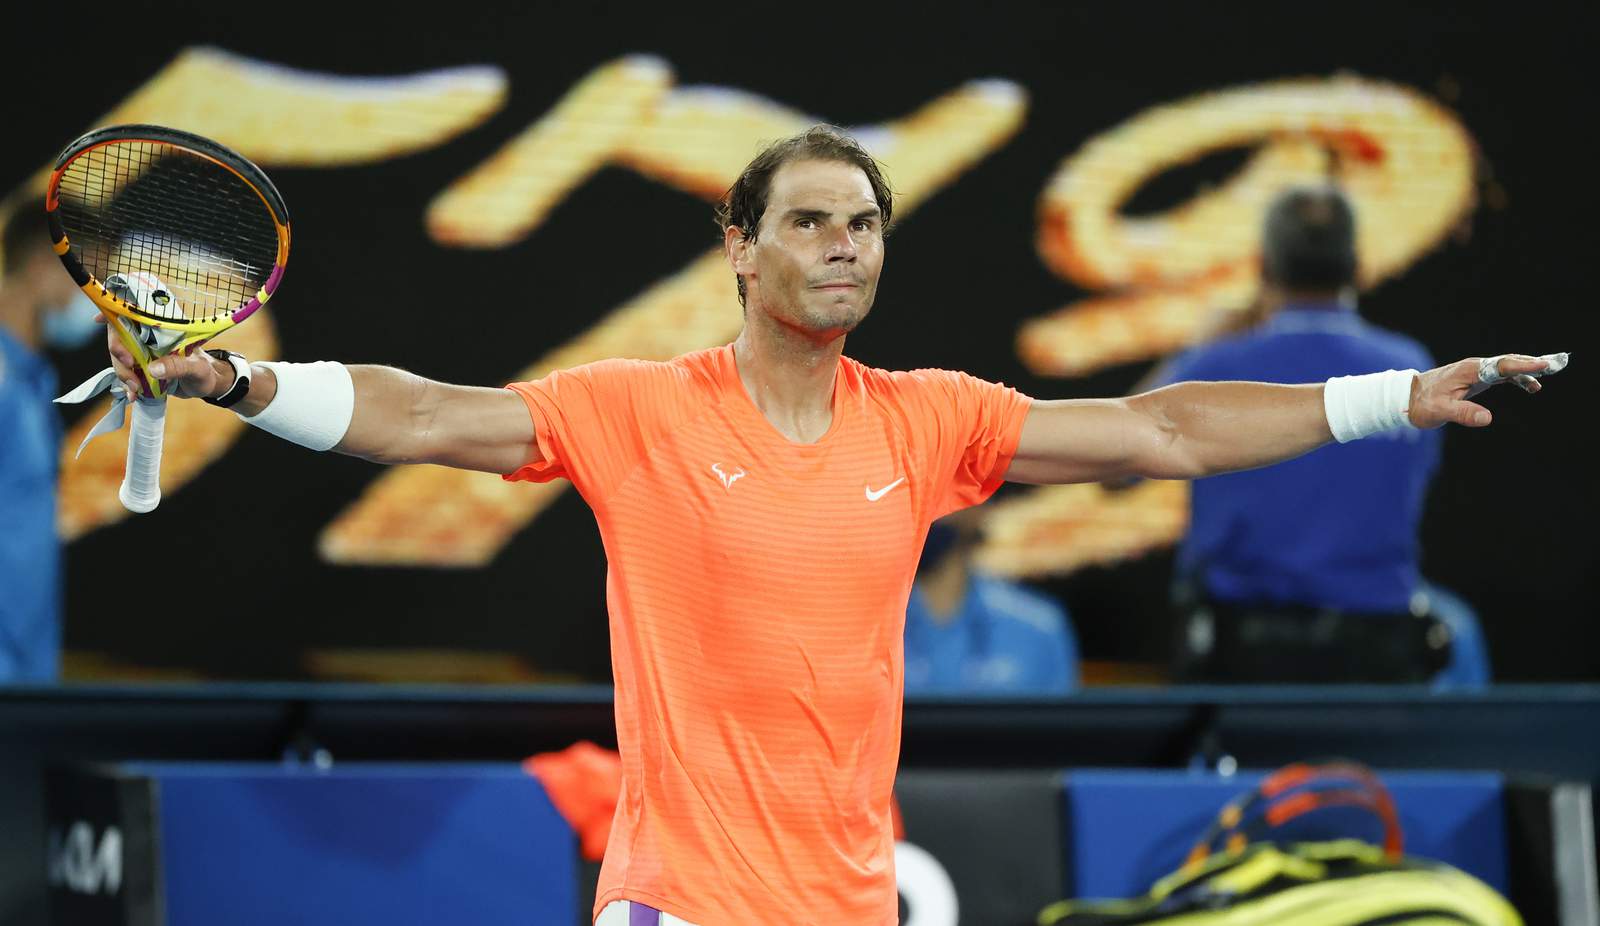 The Latest: Nadal beats Mmoh in straight sets in Melbourne